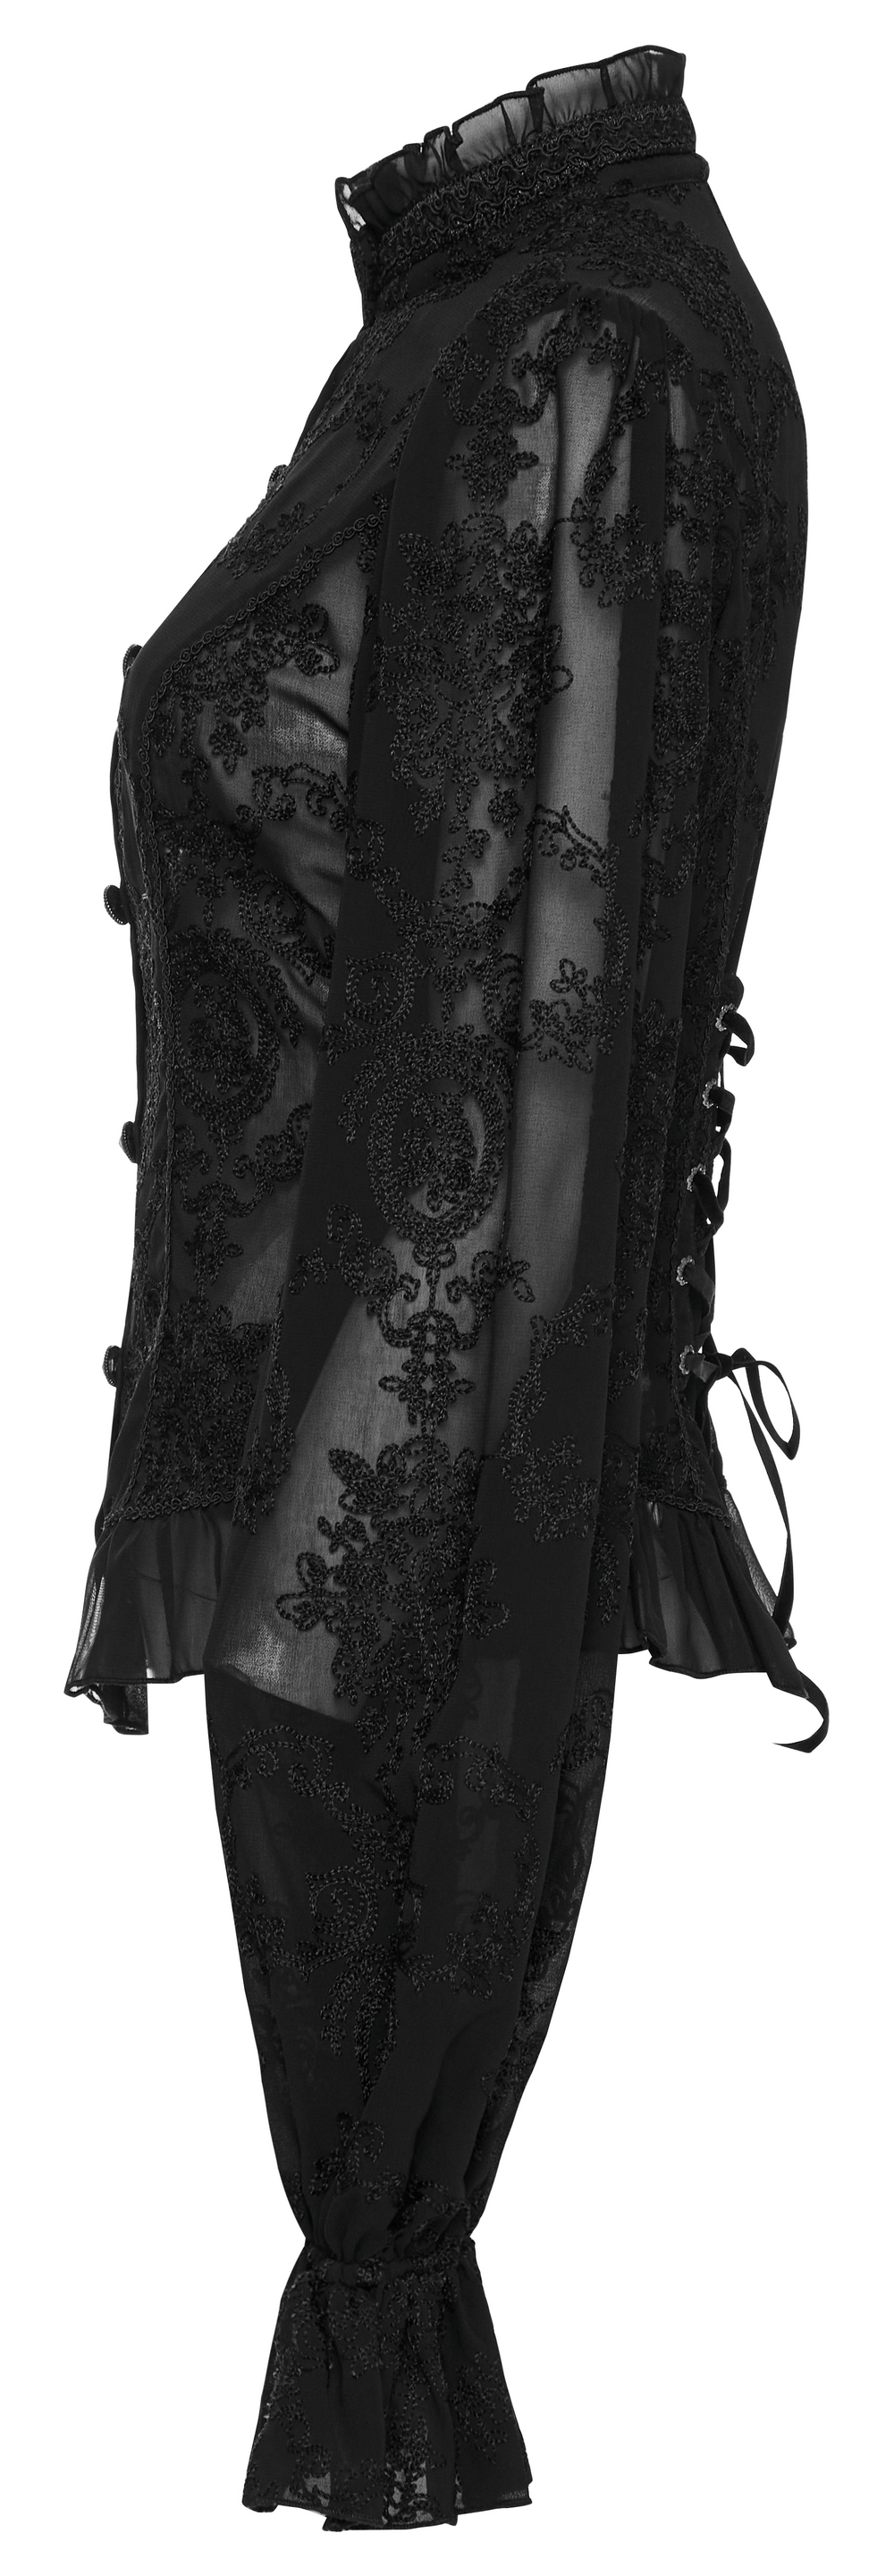 Women's Lace Ruffle Gothic Blouse for Evening Wear - HARD'N'HEAVY